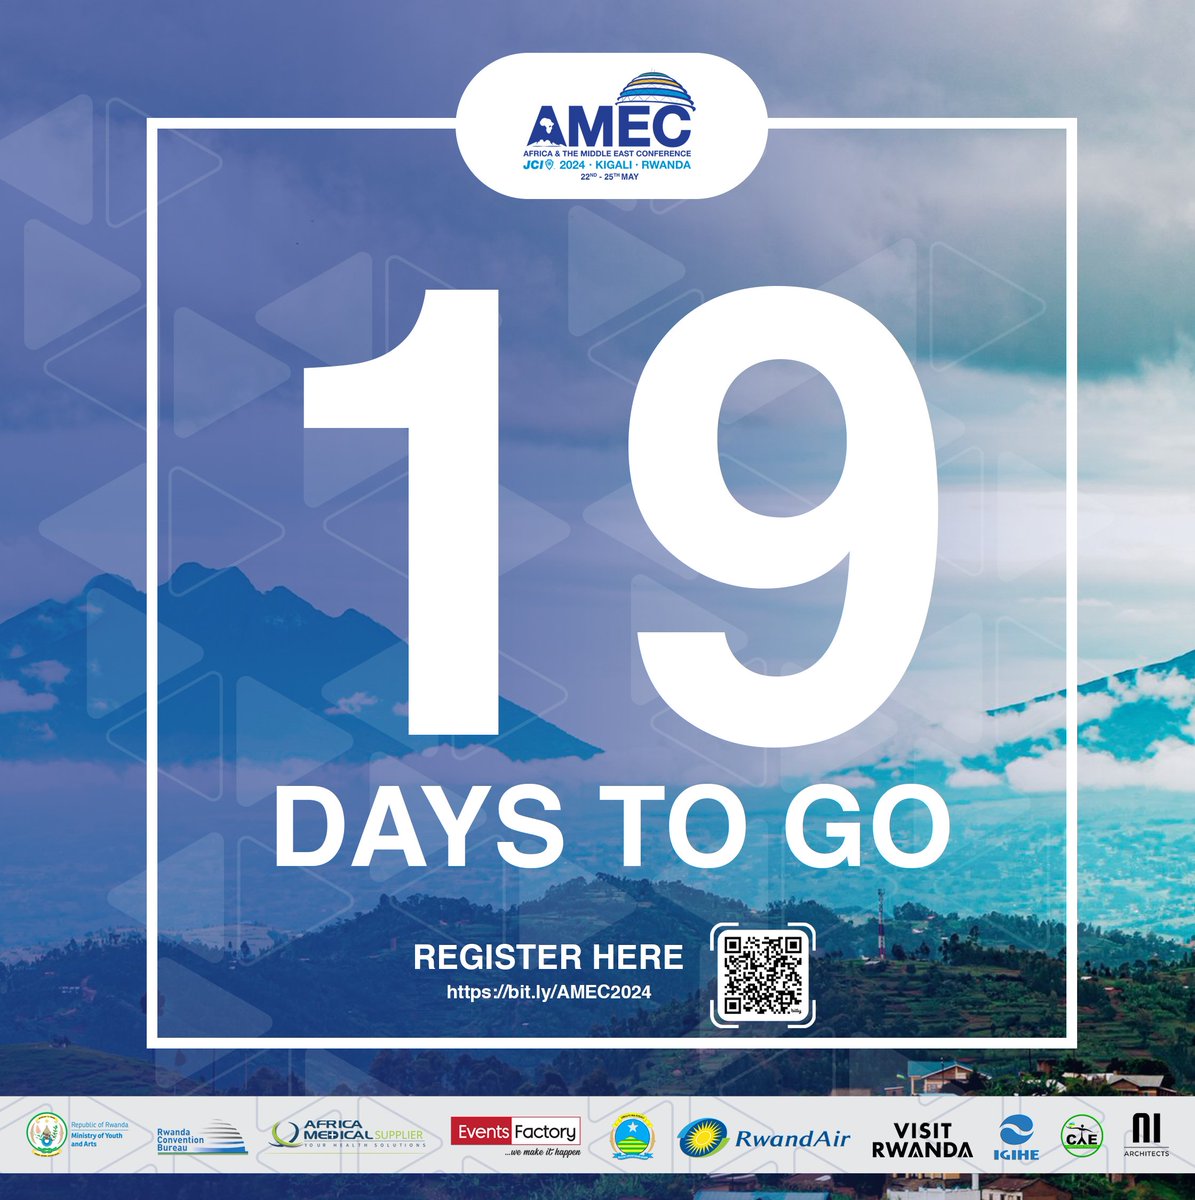 ⏳ With just 19 days to go, the excitement for #AMEC2024 is building up!
Get ready to unlock your potential, connect with like-minded individuals, and embark on a journey of growth and empowerment.

#jci #jcileaders #letsmakeadifference